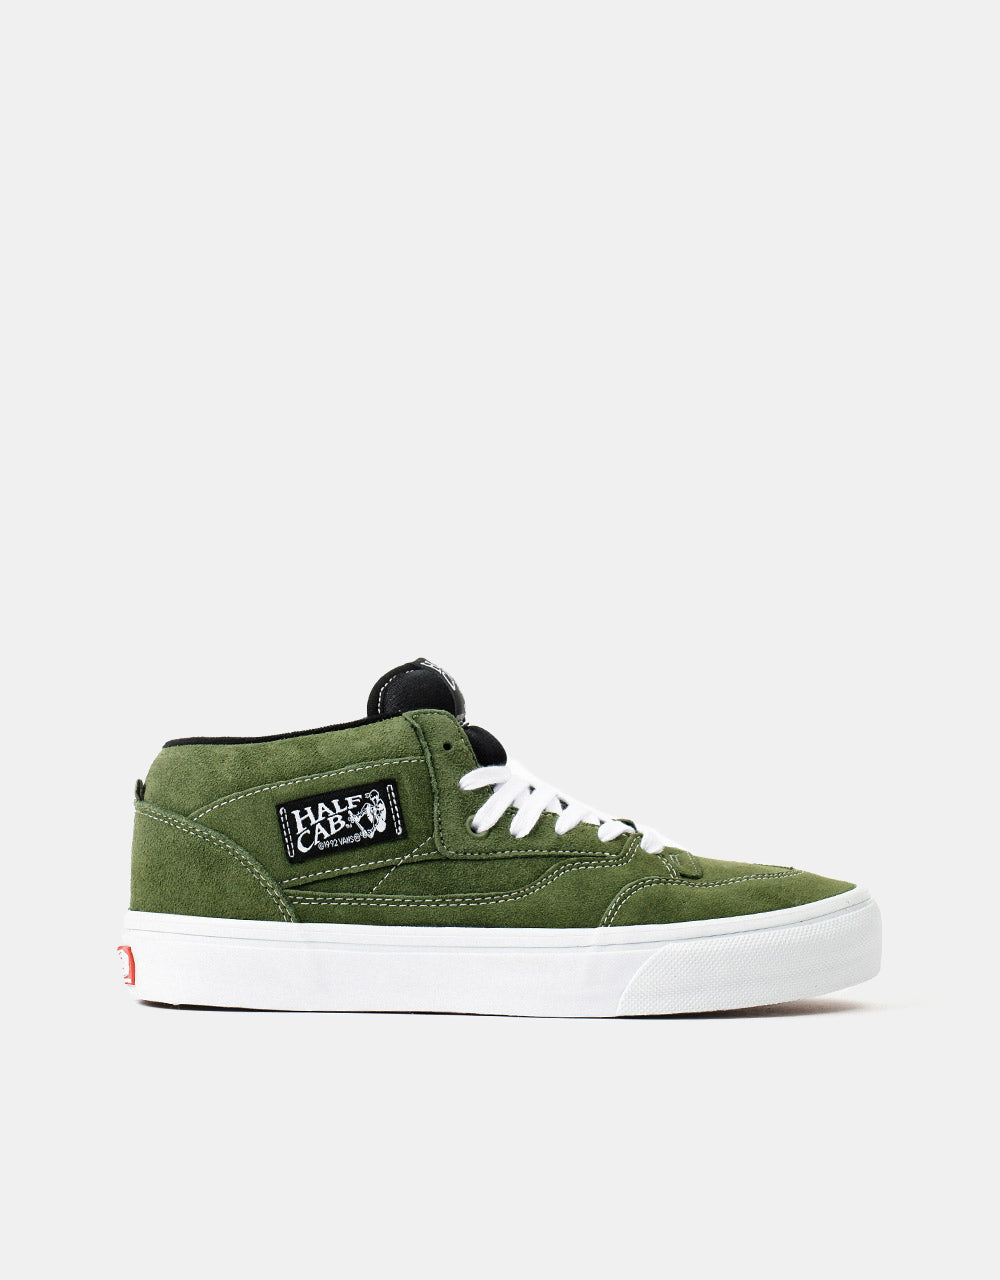 Vans Skate Half Cab R1 UK EXCLUSIVE Shoes - Chive/White – Route One